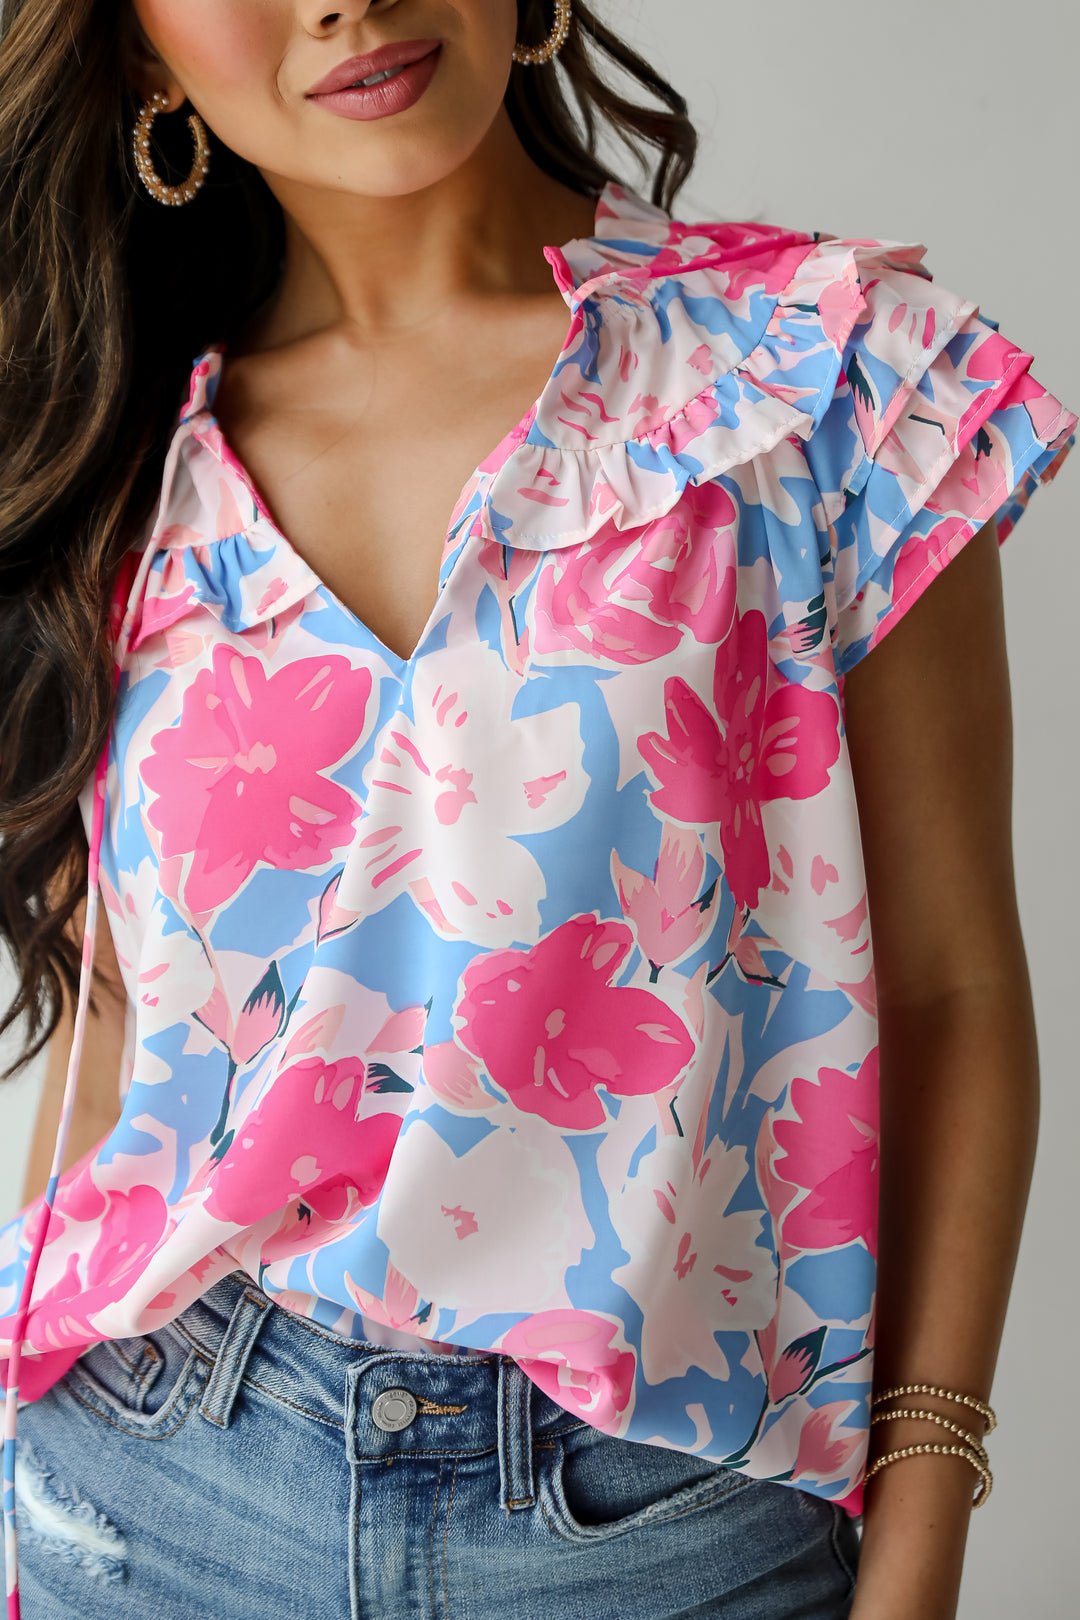 Exceedingly Adorable Pink Floral Blouse